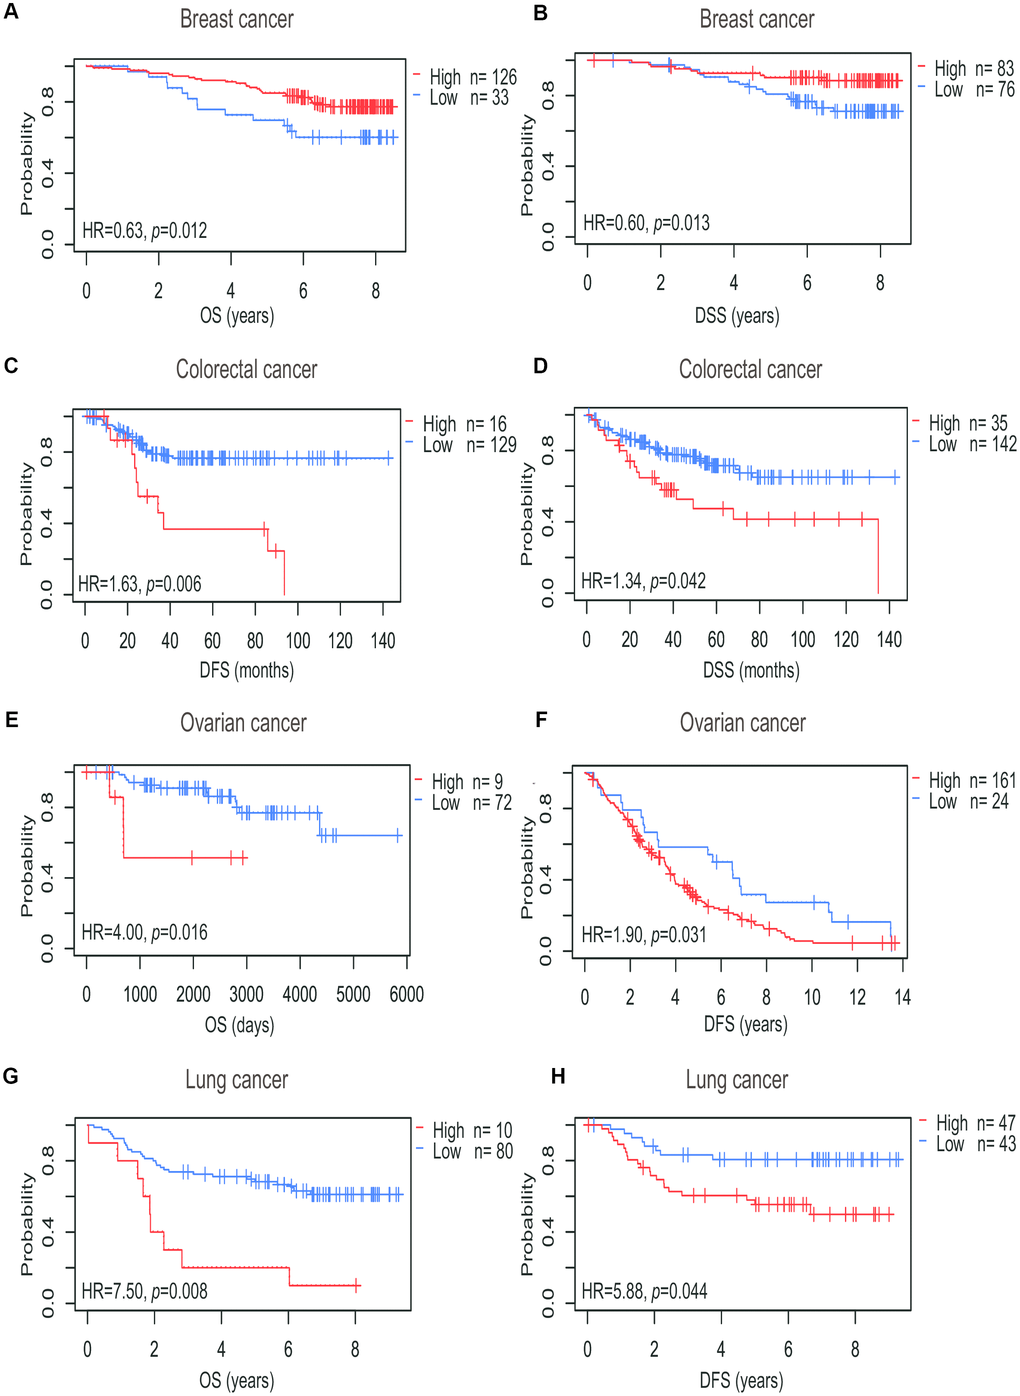 Survival curves of high or low expression of PTGIS in different tumors from the PrognoScan database. (A, B) High PTGIS expression was correlated with better OS and DSS than low PTGIS expression in the breast cancer cohort [GSE1456-GPL96 (n = 159)]. (C, D) High PTGIS expression was correlated with poorer DFS (n = 145) and DSS (n = 177) than low PTGIS expression in the colorectal cancer cohort (GSE17536). (E, F) High PTGIS expression was correlated with poorer OS and DFS than low PTGIS expression in two ovarian cancer cohorts [GSE8841 (n = 81) and GSE26712 (n = 185)]. (G, H) High PTGIS expression was correlated with poorer OS and DSS than low PTGIS expression in a lung cancer cohort (GSE14814, n = 90). OS, overall survival; DFS, disease-free survival; DSS, disease-specific survival.